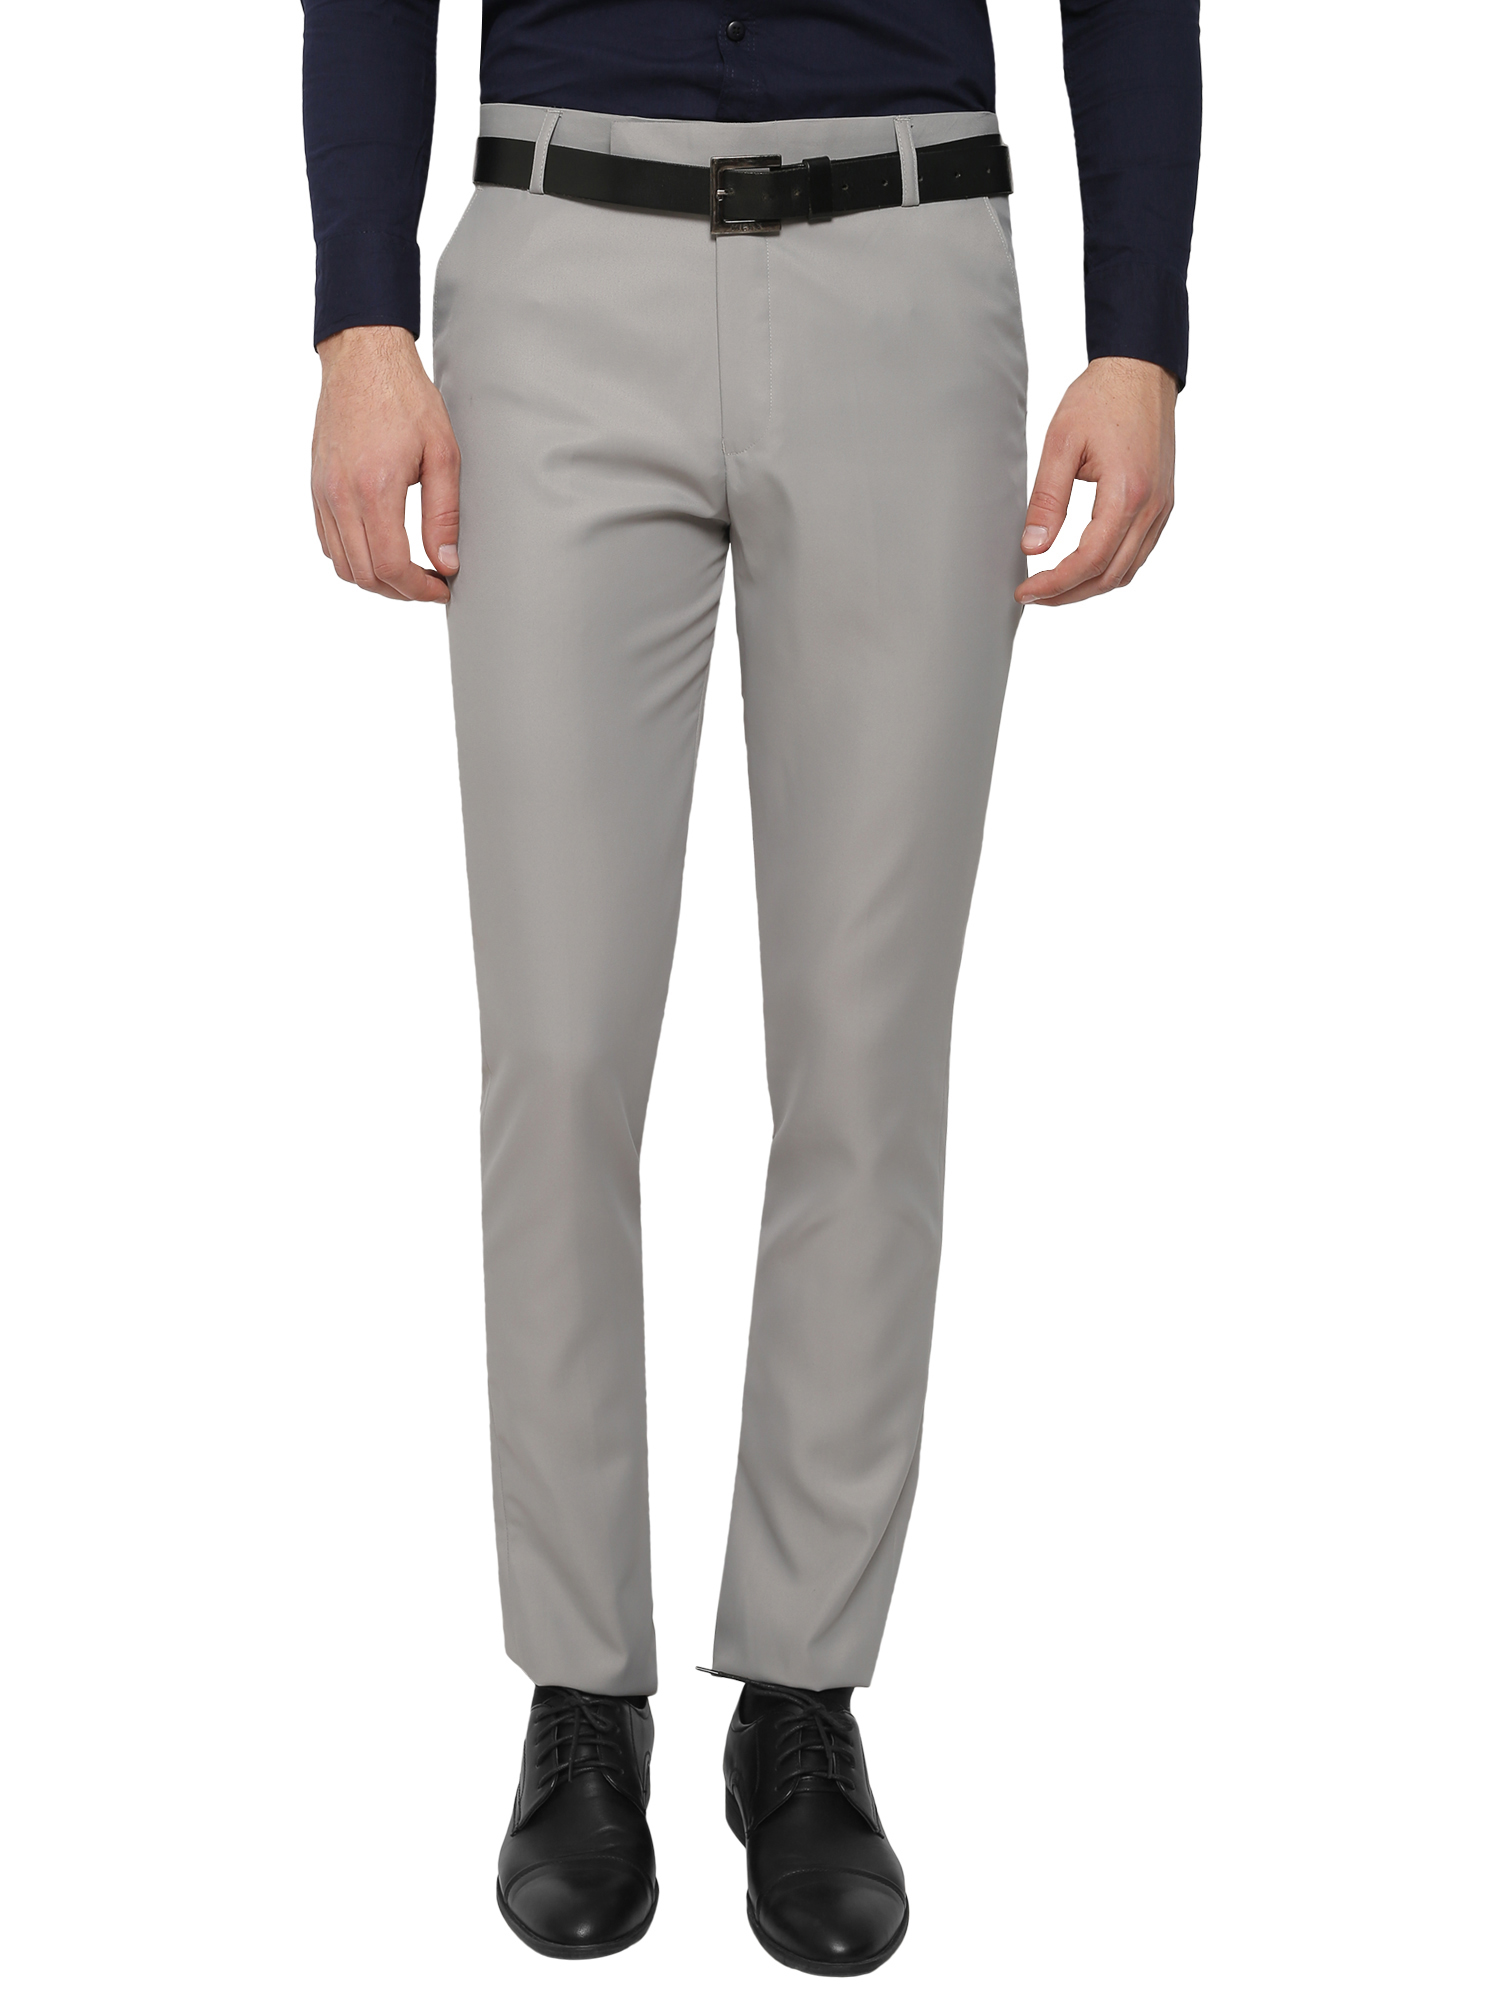 Buy Gwalior Pack Of 3 Formal Trousers (Light Grey, Light Brown, White ...